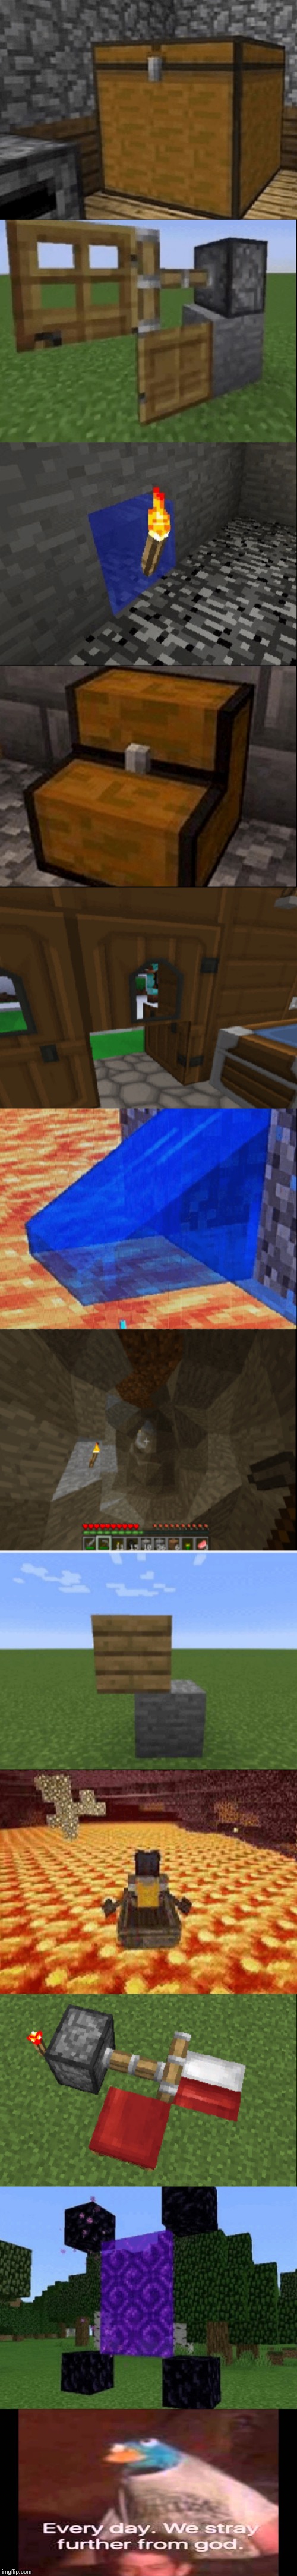 image tagged in every day we stray further from god,minecraft,wtf | made w/ Imgflip meme maker